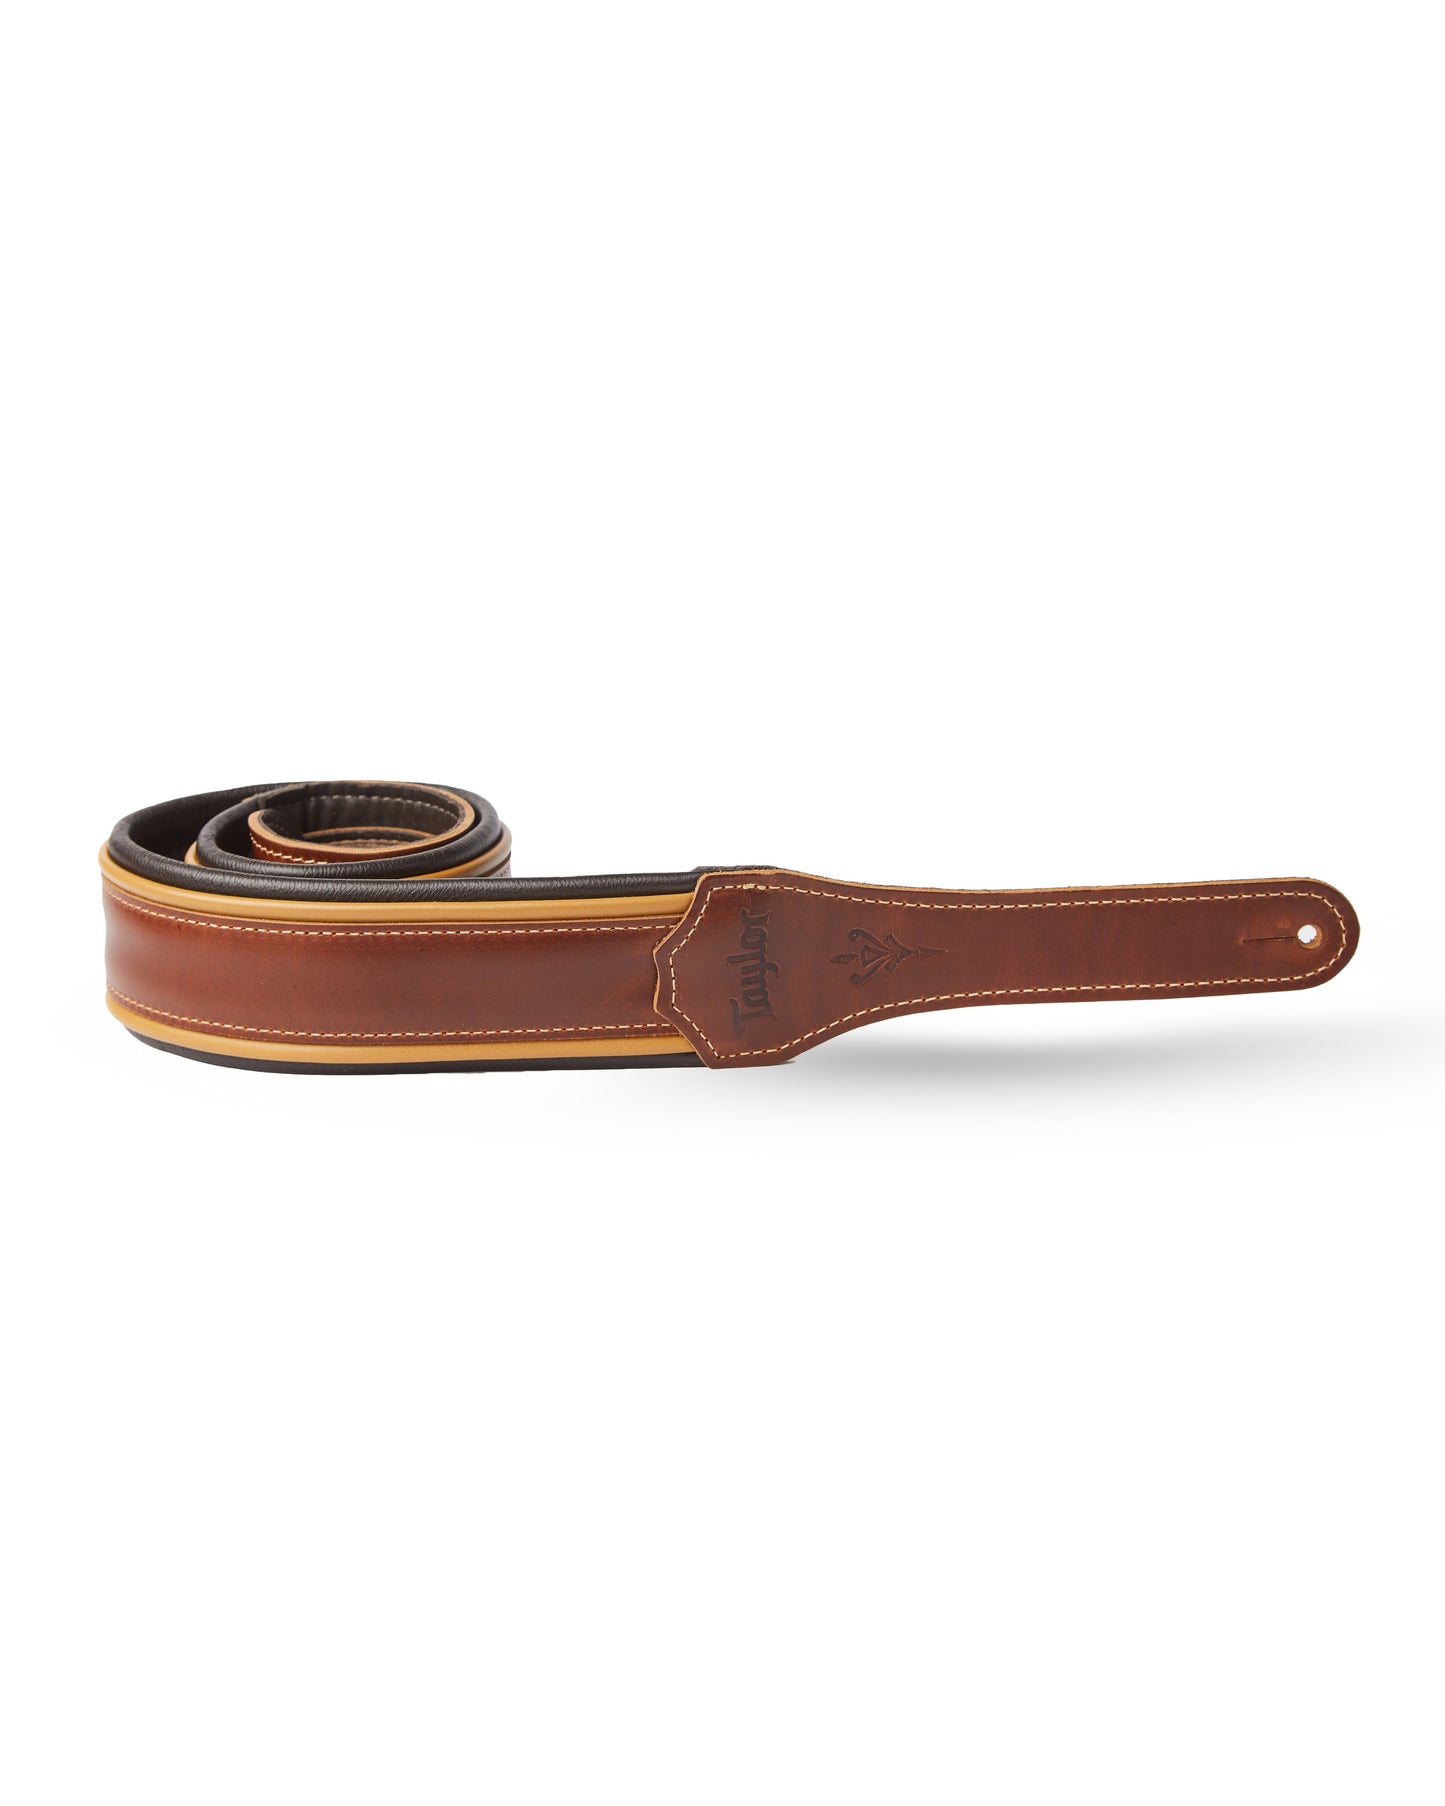 Image 1 of Taylor Century 2.5" Leather Guitar Strap, Brown/Butterscotch/Black - SKU# 5250-03 : Product Type Accessories & Parts : Elderly Instruments